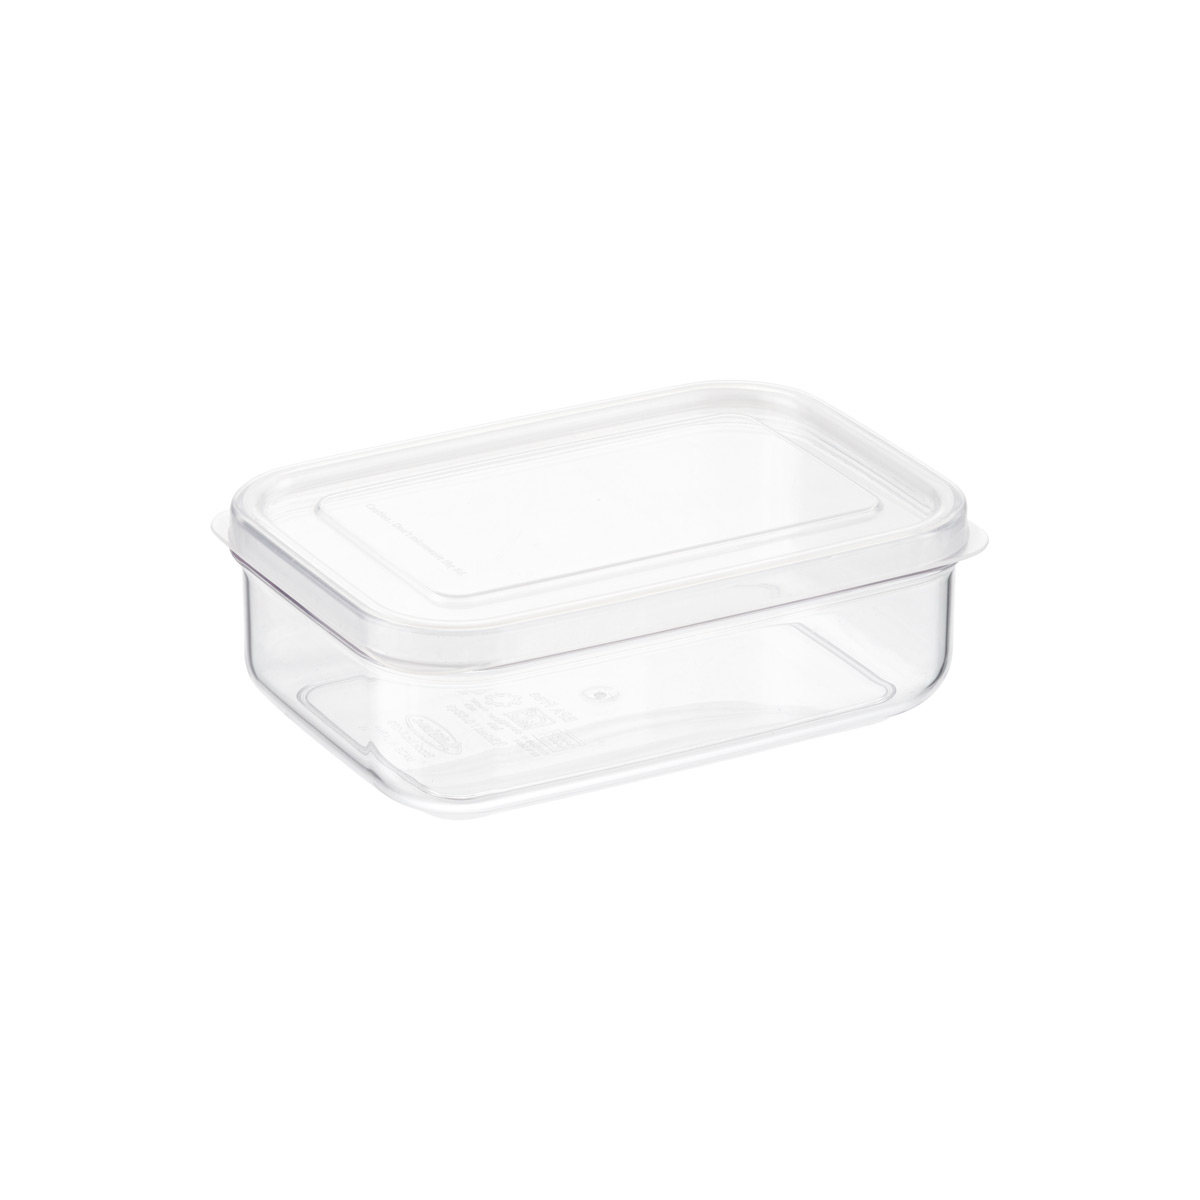 https://www.containerstore.com/catalogimages/308251/10053305-lustroware-clear-food-conta.jpg